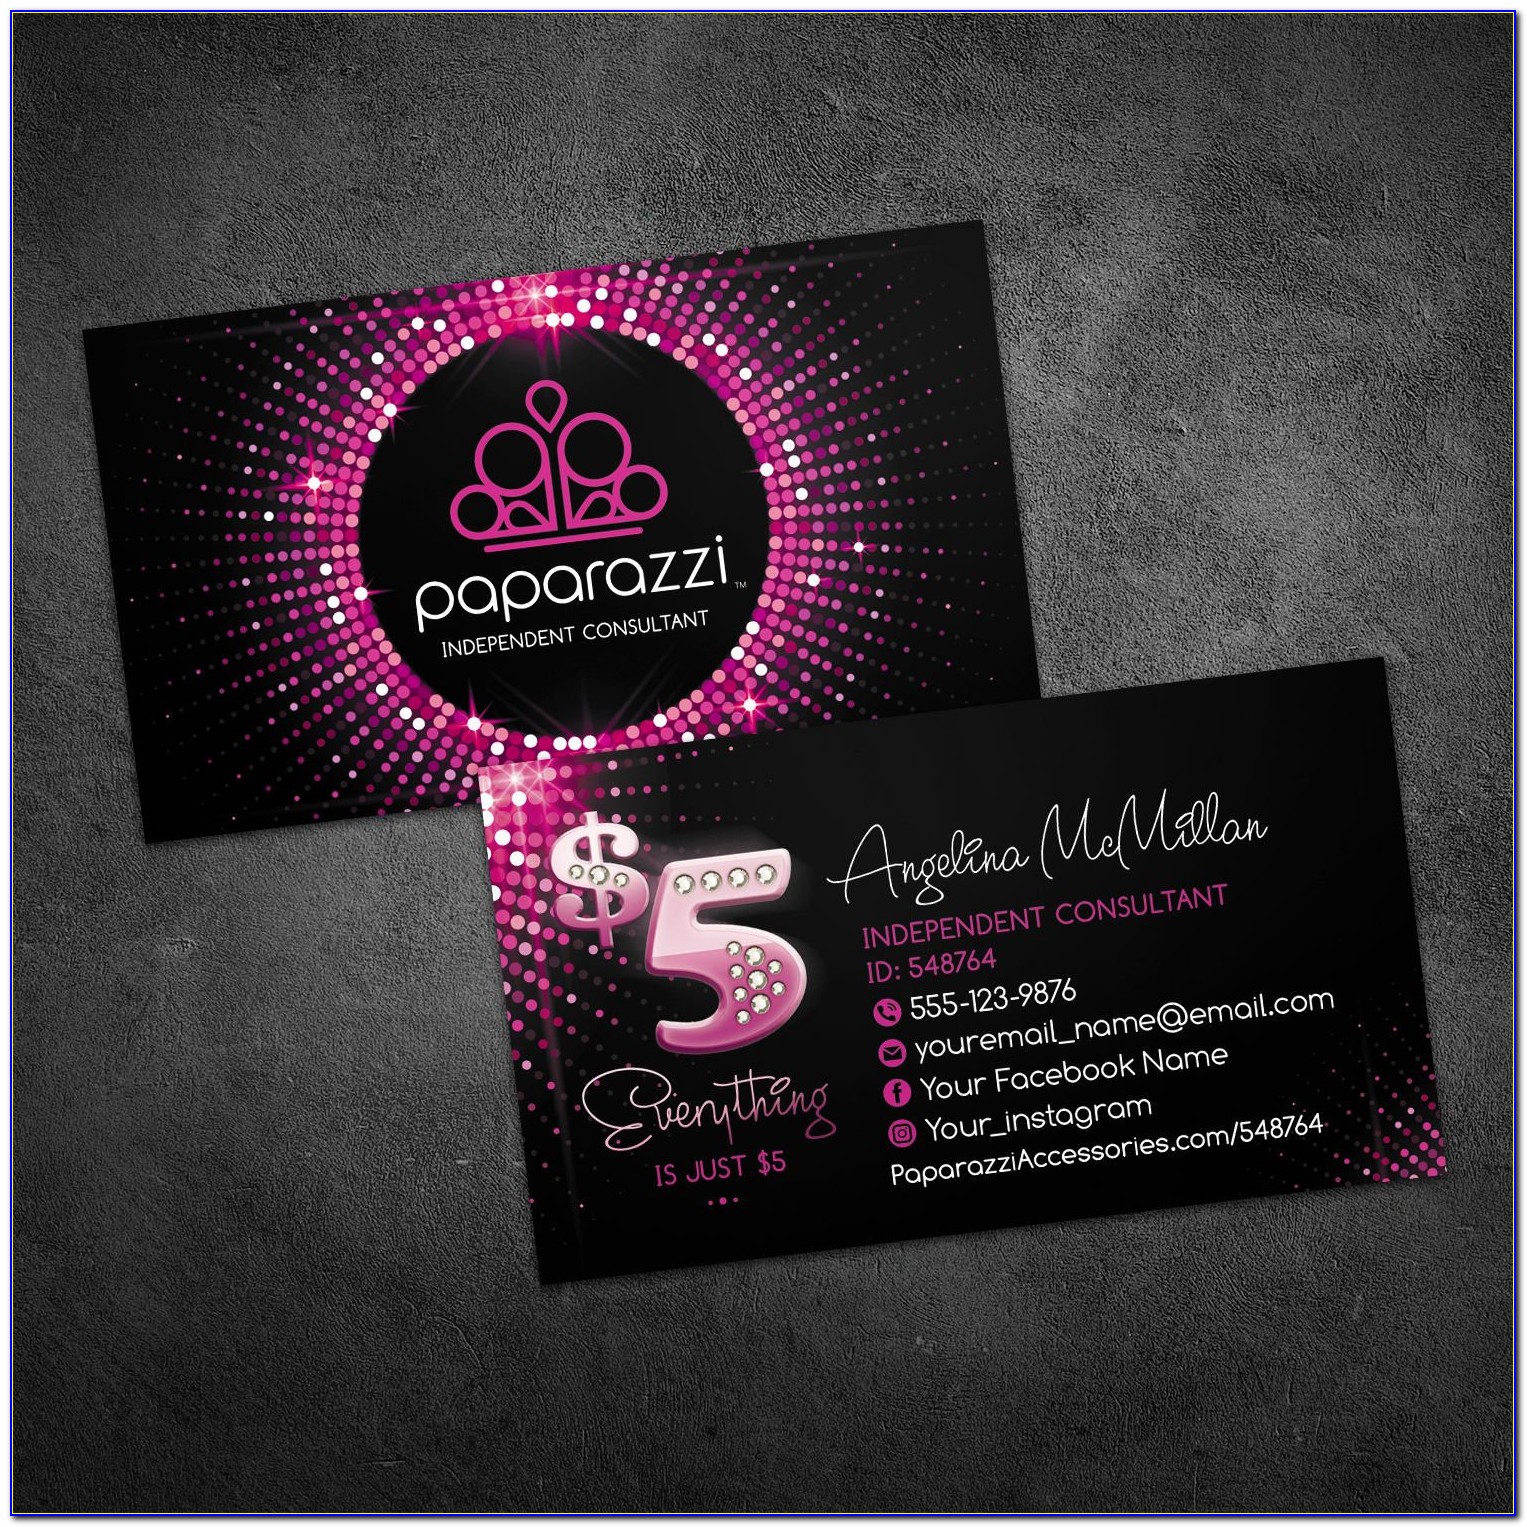 Paparazzi Business Card Template